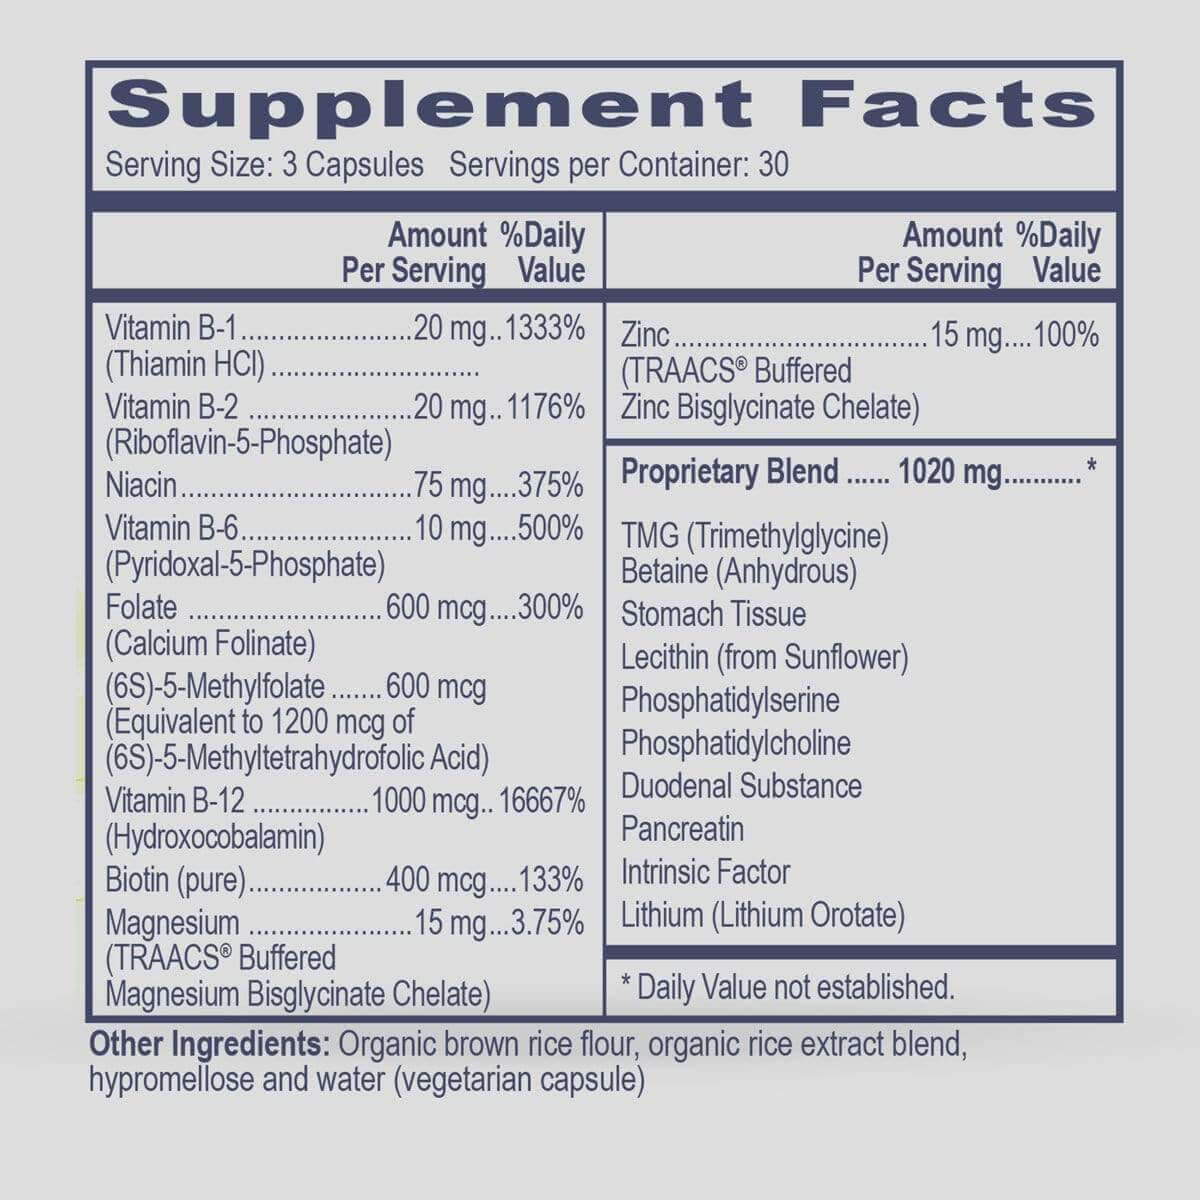 MTHFR & BHMT Assist Prof Health Products Supplement - Conners Clinic